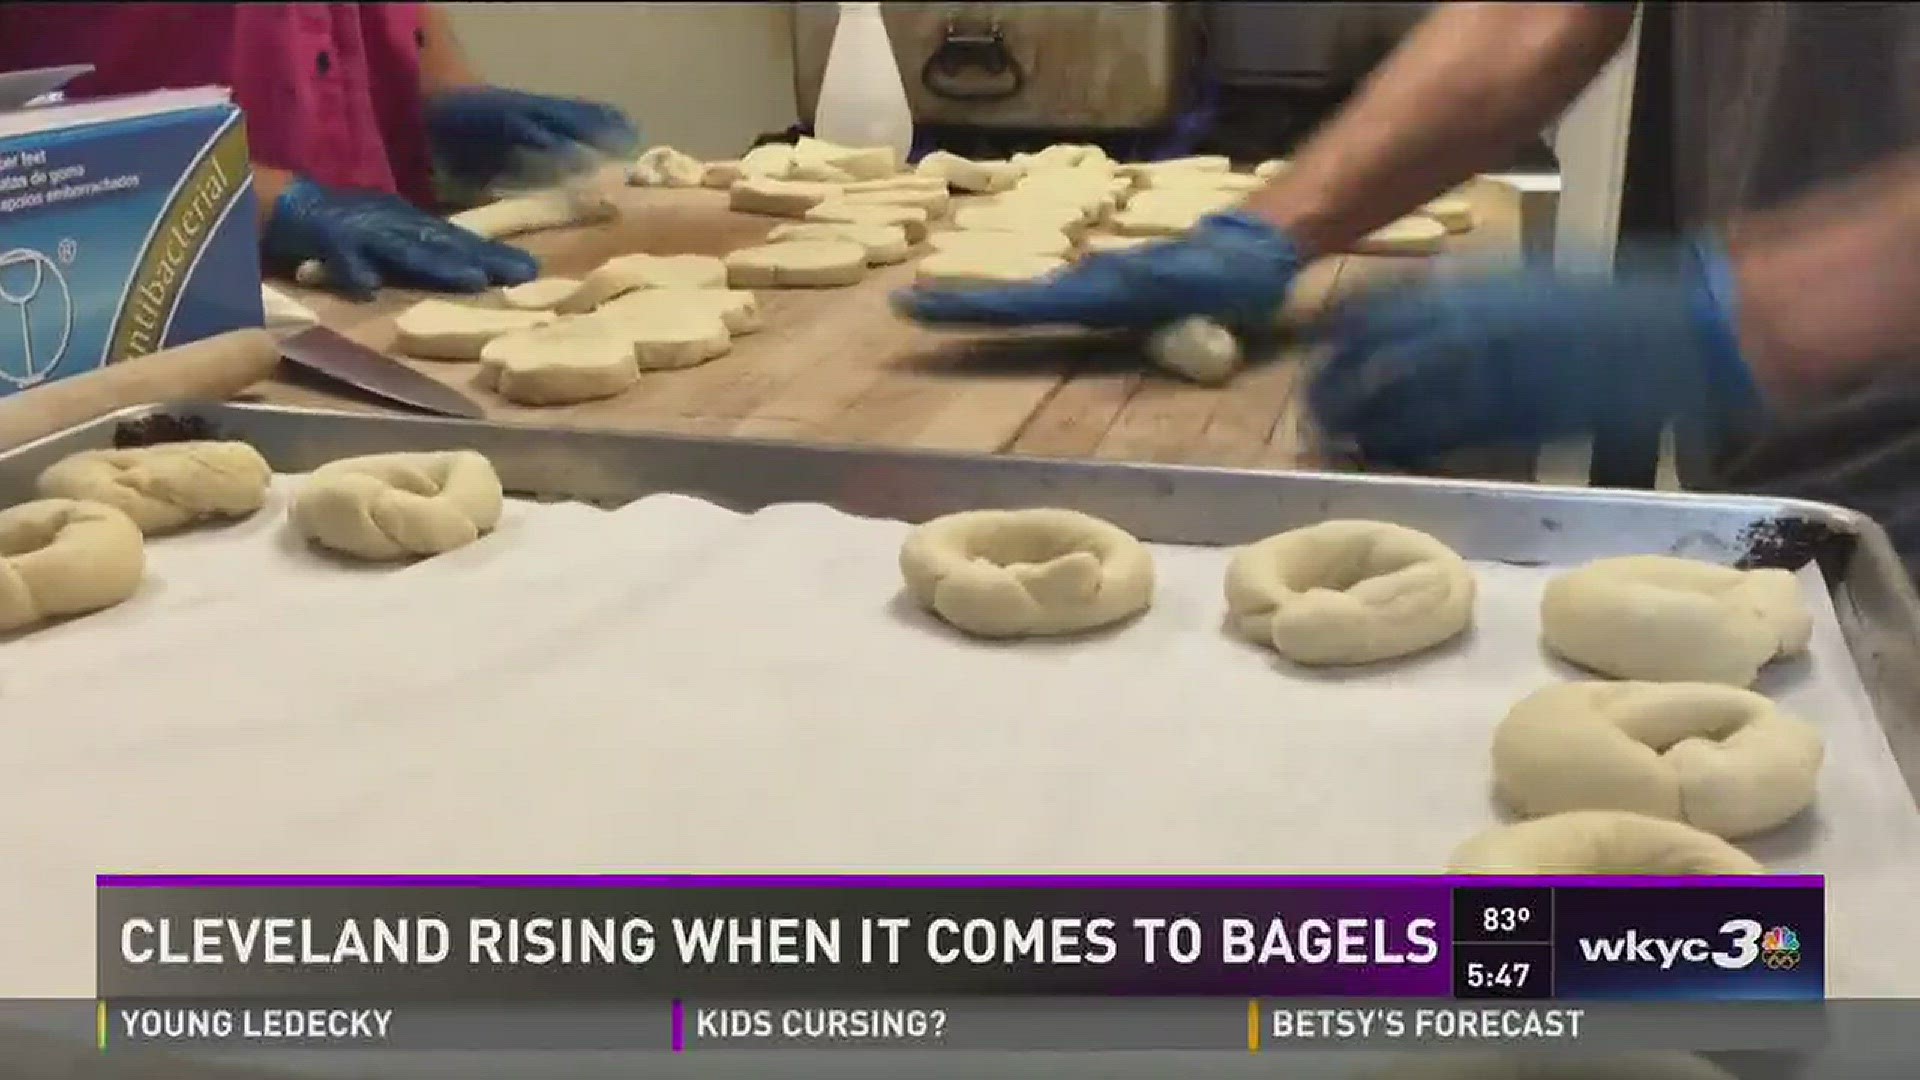 Cleveland rising when it comes to bagels